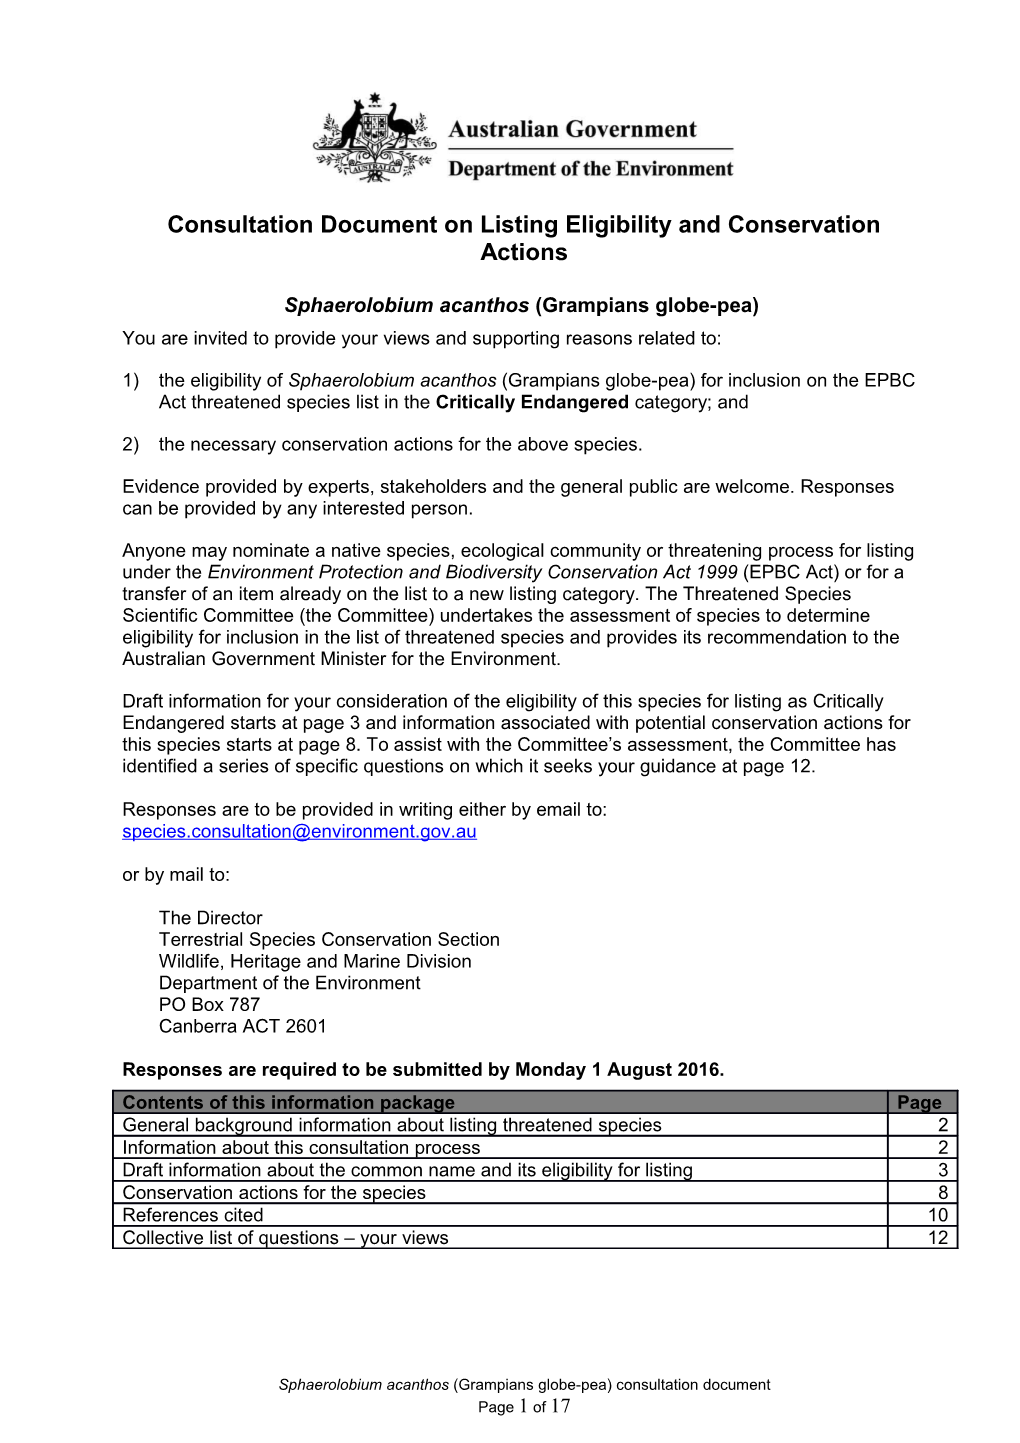 Consultation Document on Listing Eligibility and Conservation Actions Sphaerolobium Acanthos